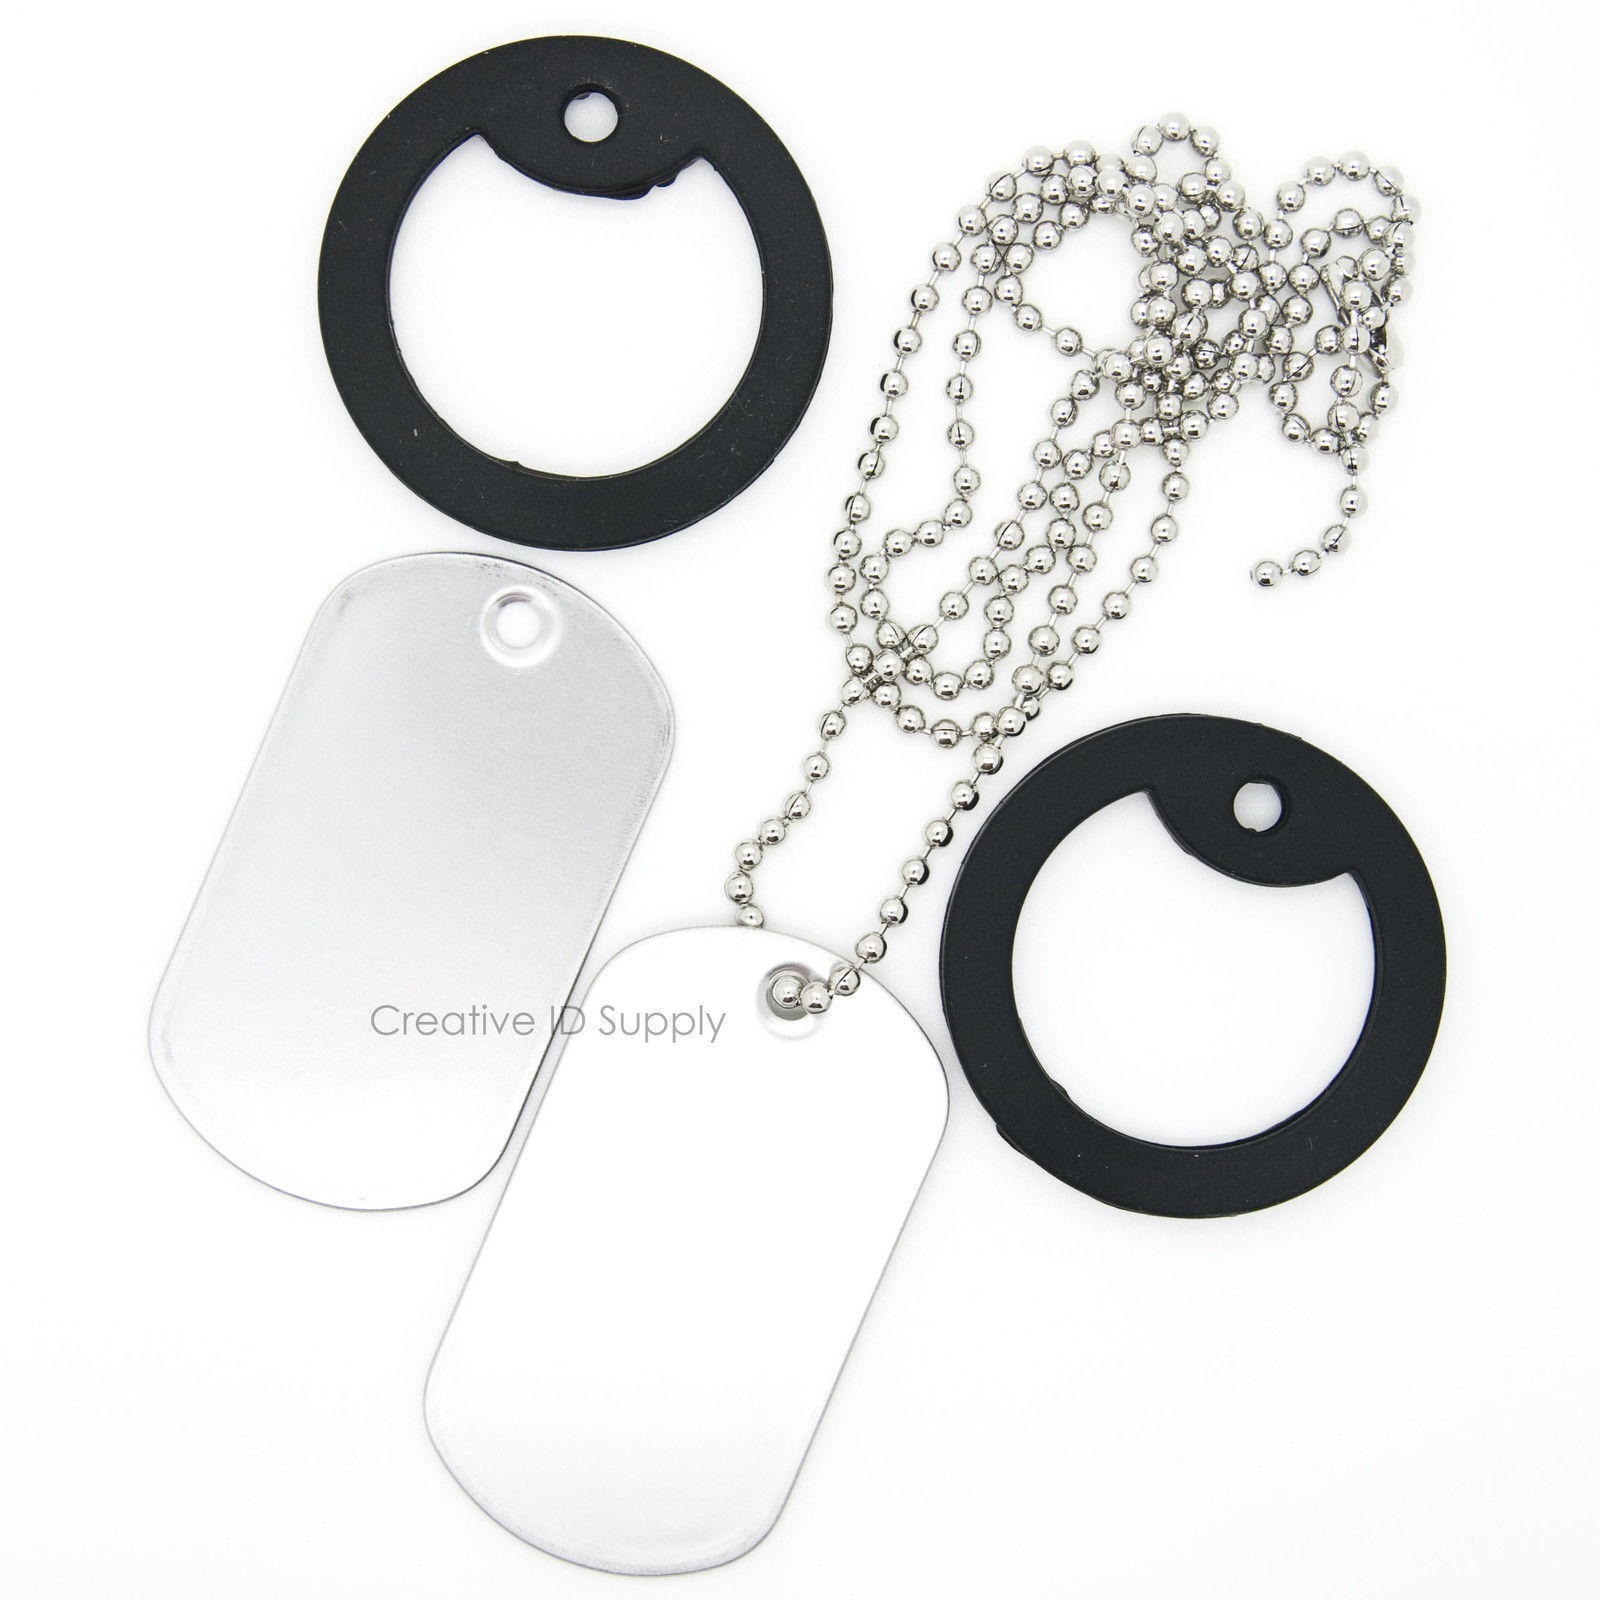 500 MATTE STAINLESS STEEL DOG TAGS, S/S BALL CHAIN NECKLACE, SILENCER REPAIR KIT